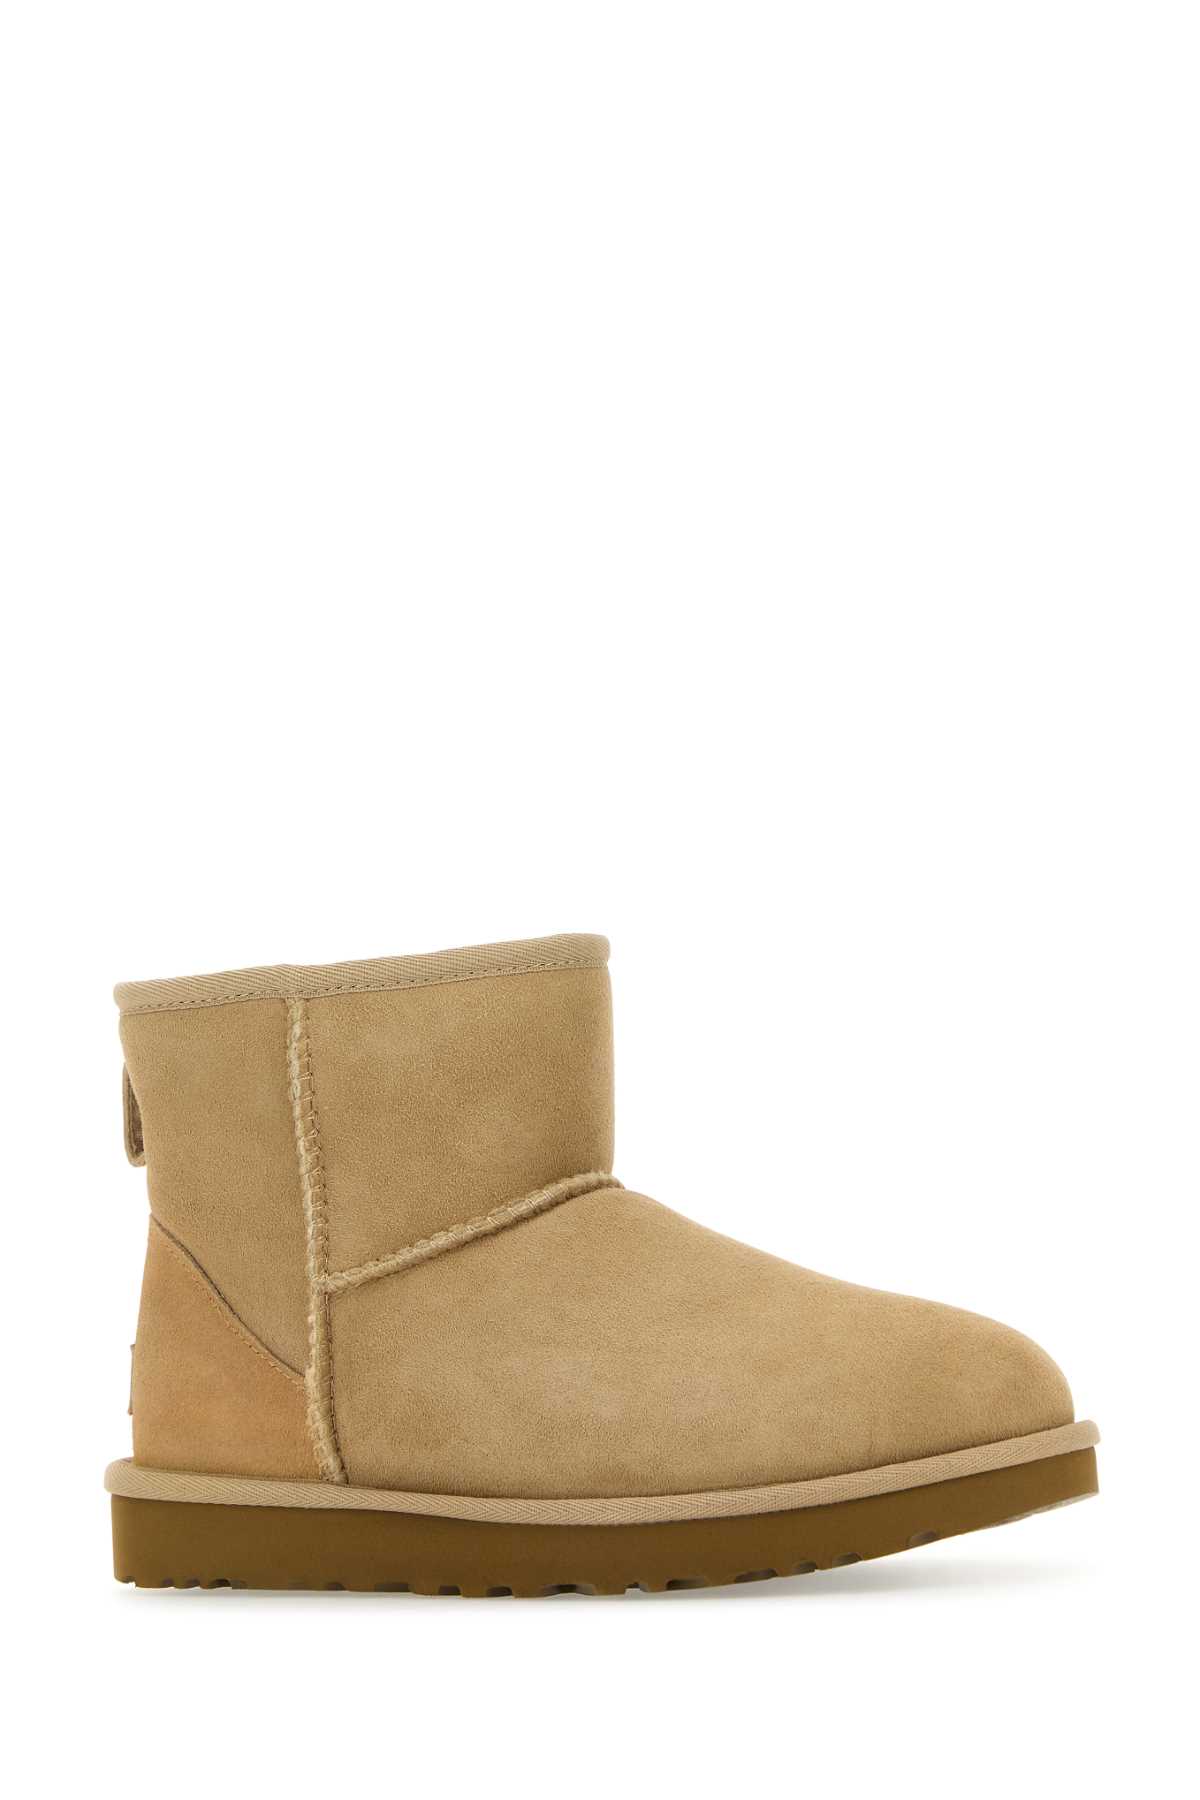 Ugg Sand Suede Classic Ultra Mini Ankle Boots